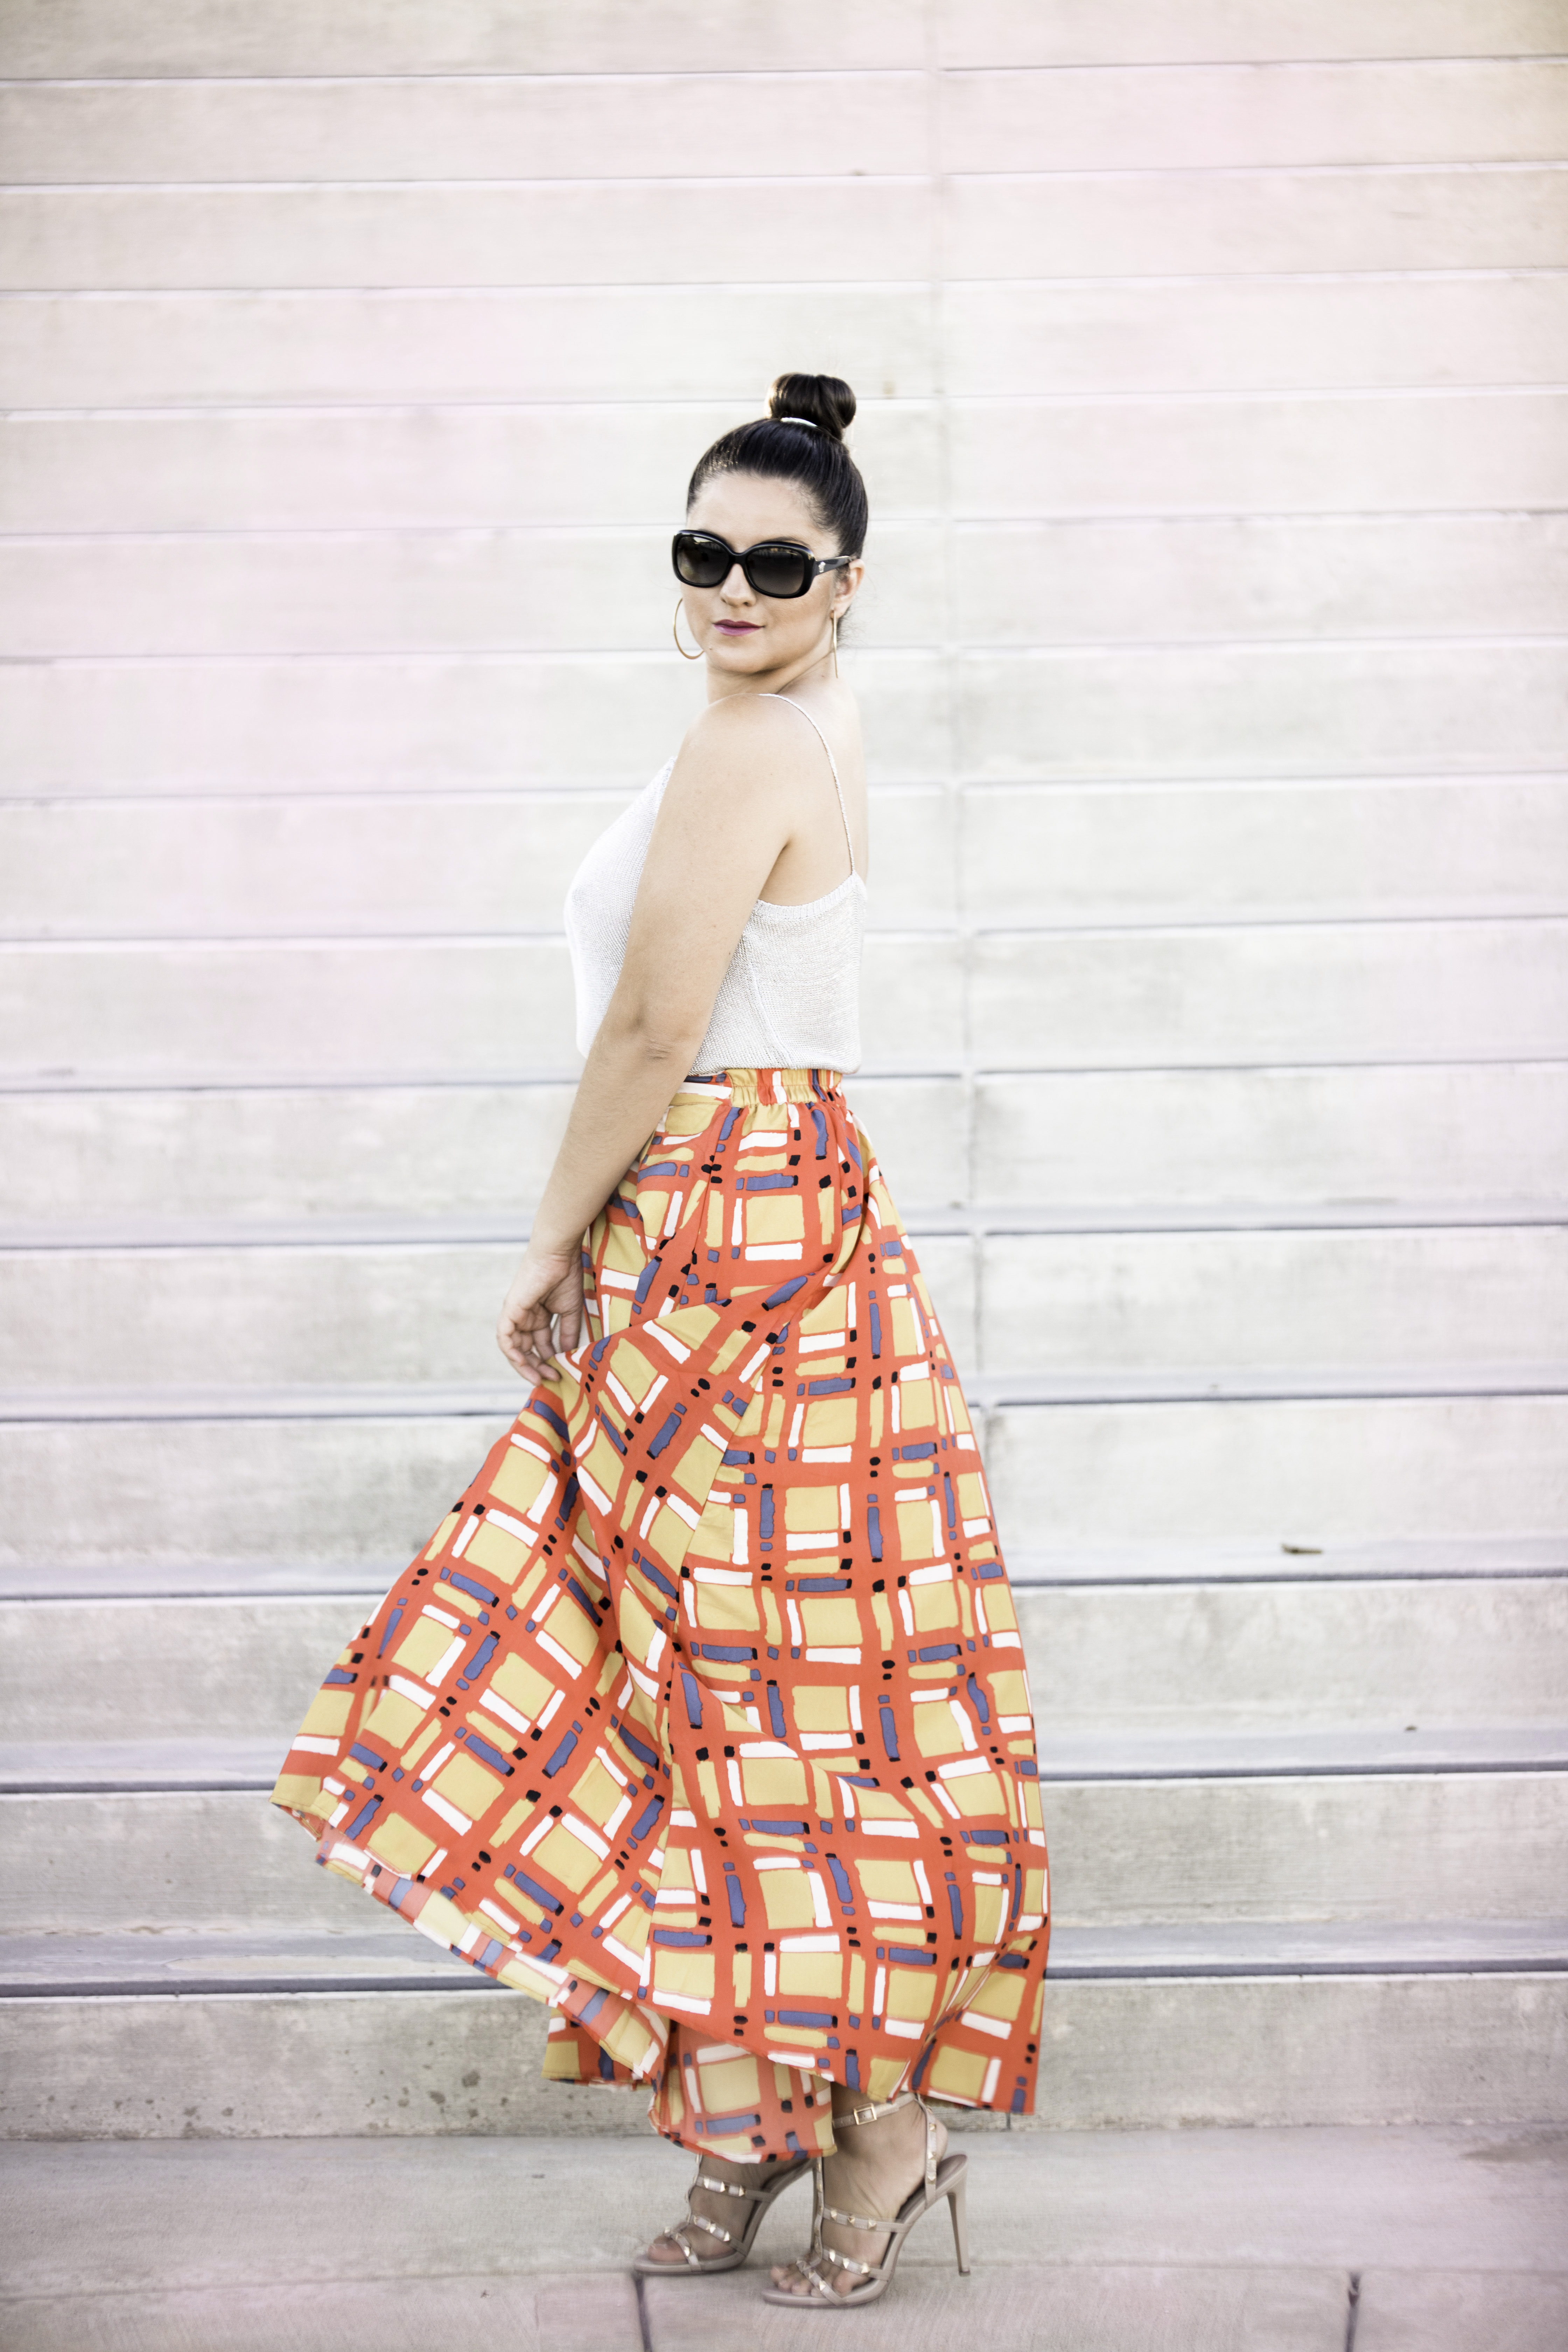 styling a maxi skirt, forever21 fashion, chicago blogger, baily lamb